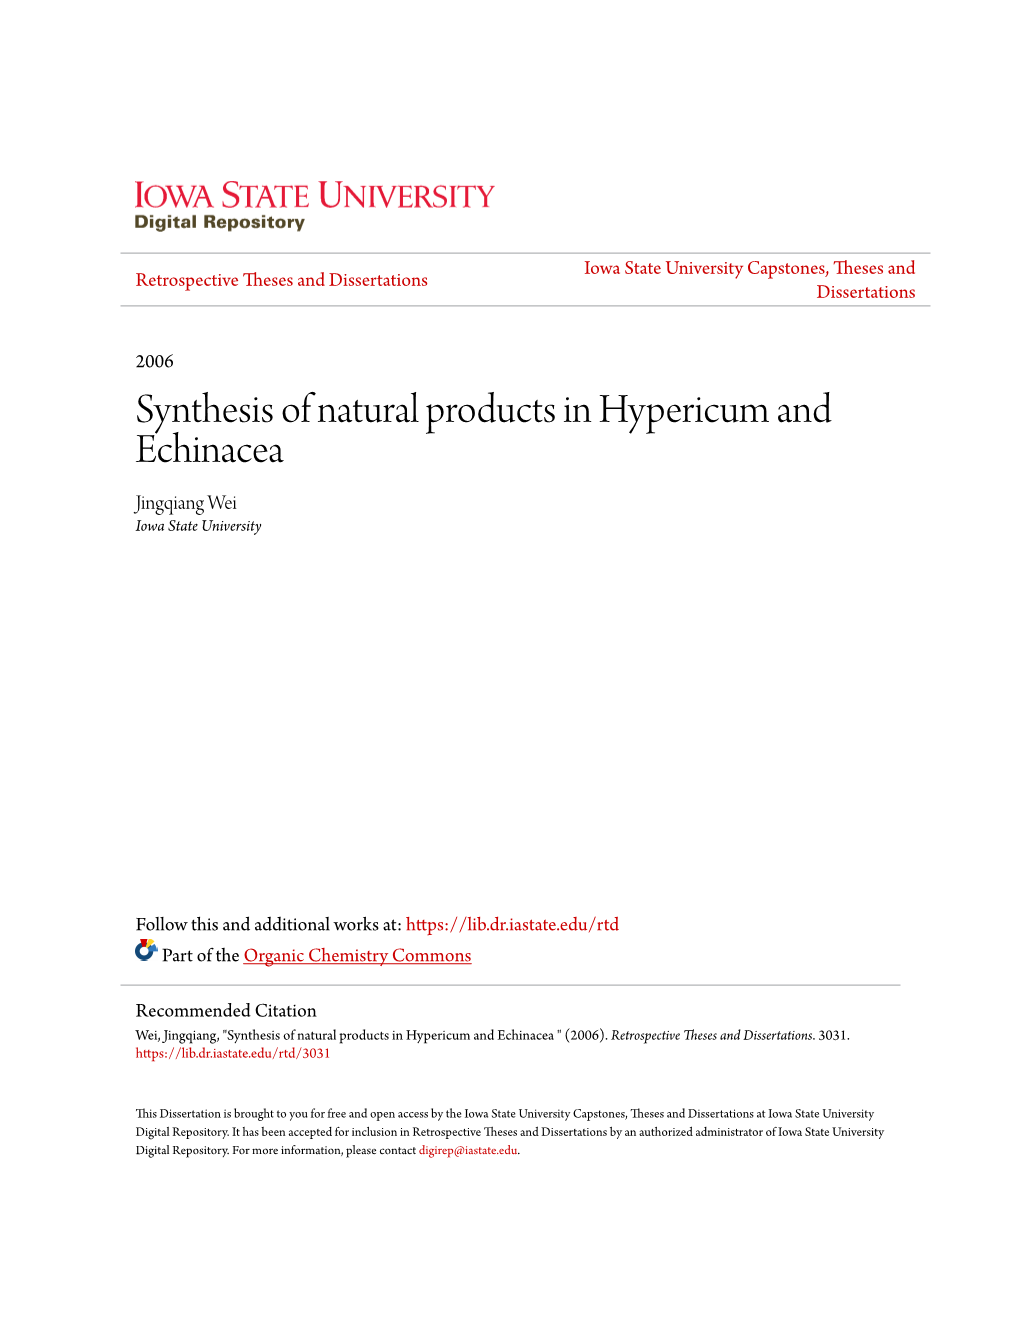 Synthesis of Natural Products in Hypericum and Echinacea Jingqiang Wei Iowa State University